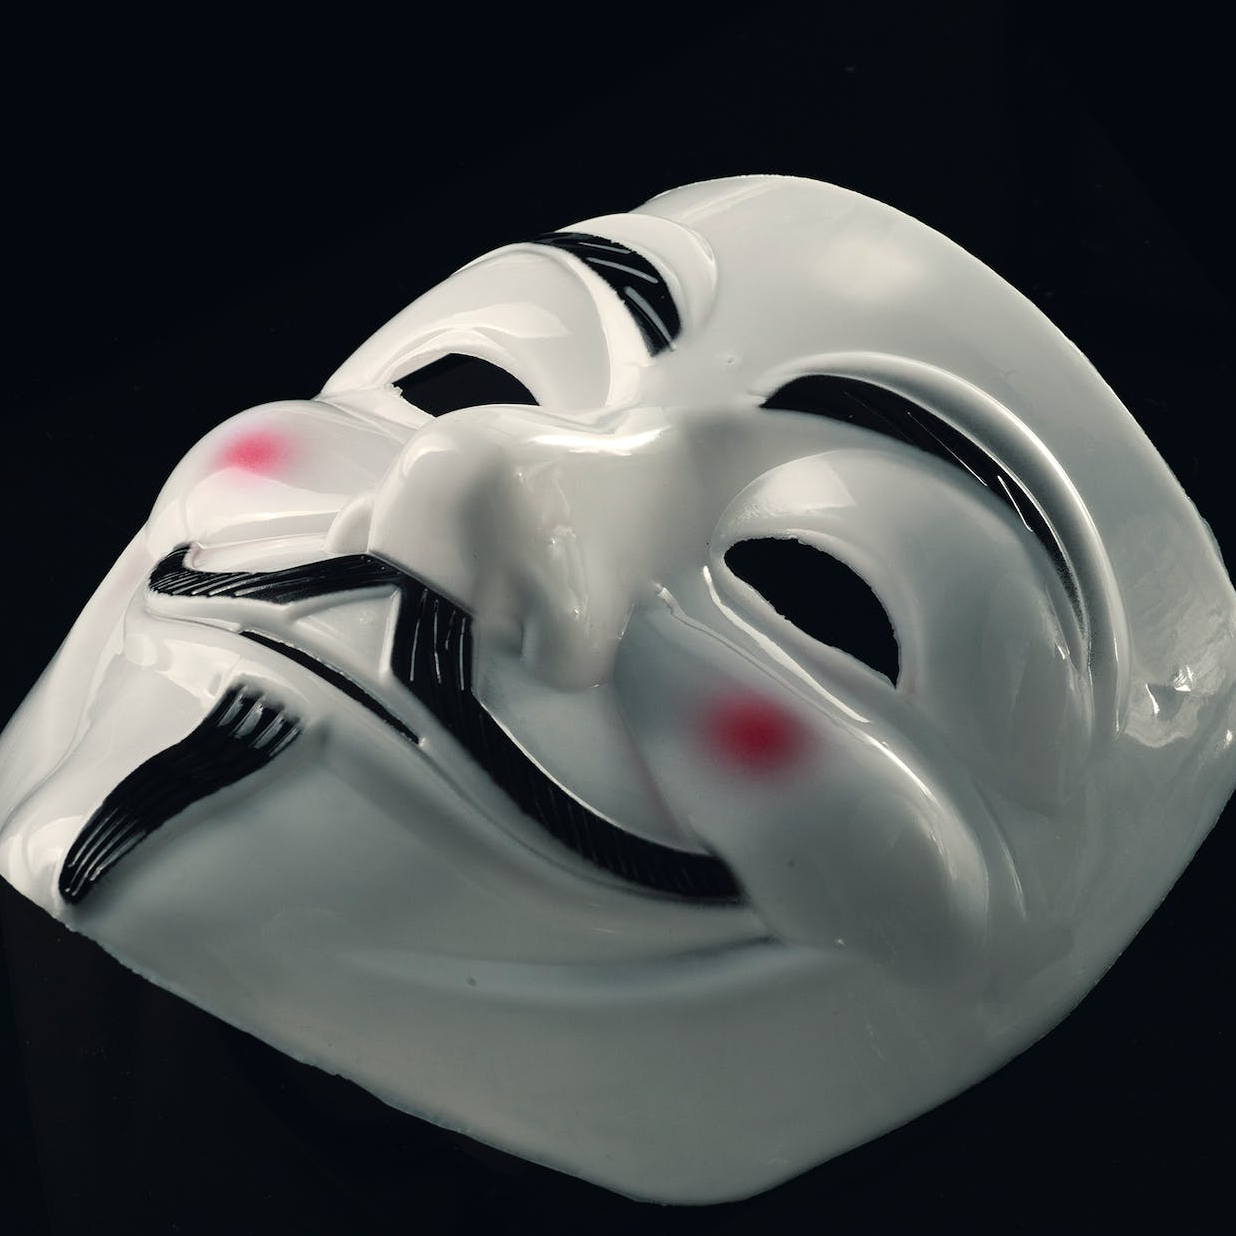 A picture of a comedy mask